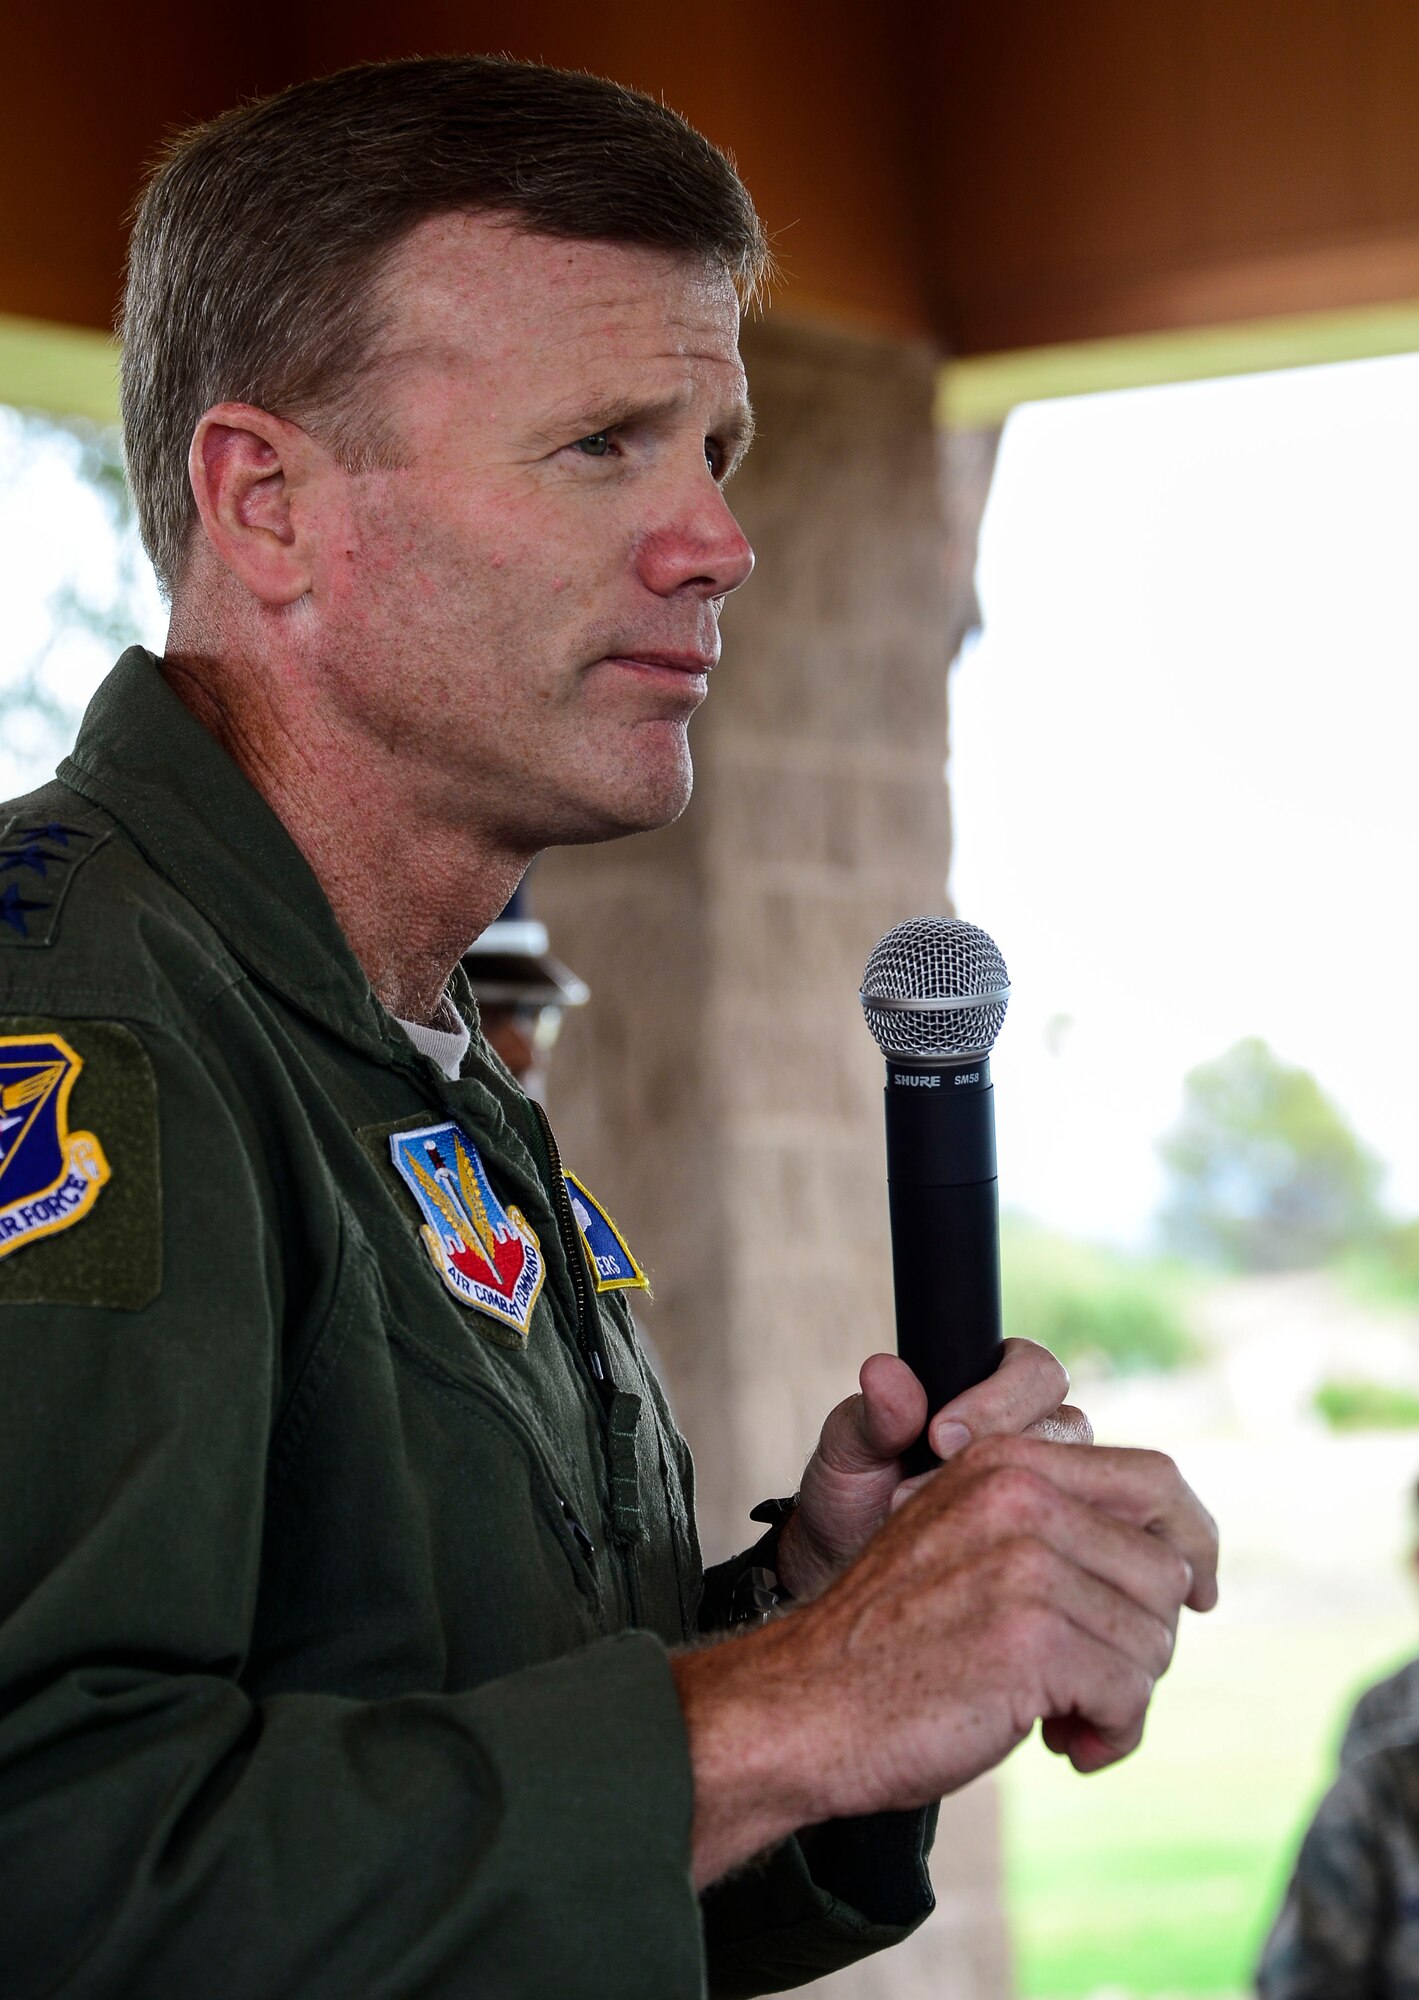 Lt. Gen. Tod Wolters, 12th Air Force (Air Forces Southern) commander, speaks to the members of 12th AF (AFSOUTH) wishing them all a happy birthday during the 12th AF (AFSOUTH)’s 67th Air Force Birthday at Davis-Monthan AFB, Ariz., Sept. 18, 2014.  Founded on Sept. 18, 1947, President Harry S. Truman signed the National Security Act that not only established a new defense organization but also established the U.S. Air Force as an independent service.  Over the past 67 years the U.S. Air Force has made its mark in history and around the world as it focuses its efforts on maintaining air, space, and cyberspace superiority.  (U.S. Air Force photo by Tech. Sgt. Heather R. Redman/Released)